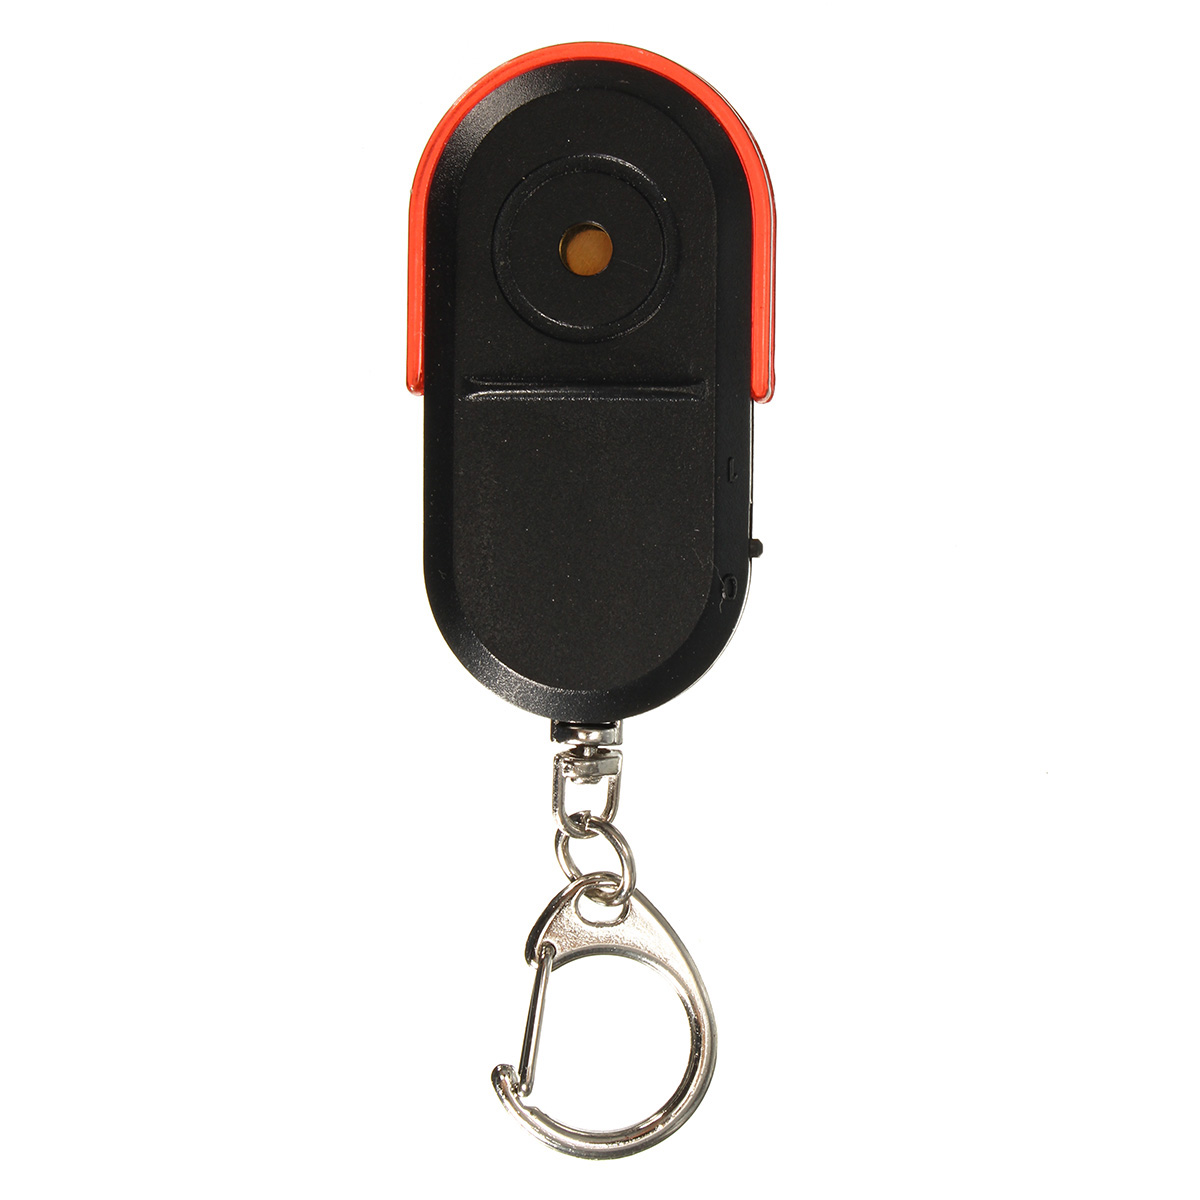 Wireless-Anti-Lost-Alarm-Key-Finder-Locator-Keychain-Whistle-Sound-with-LED-Light-1030593-8